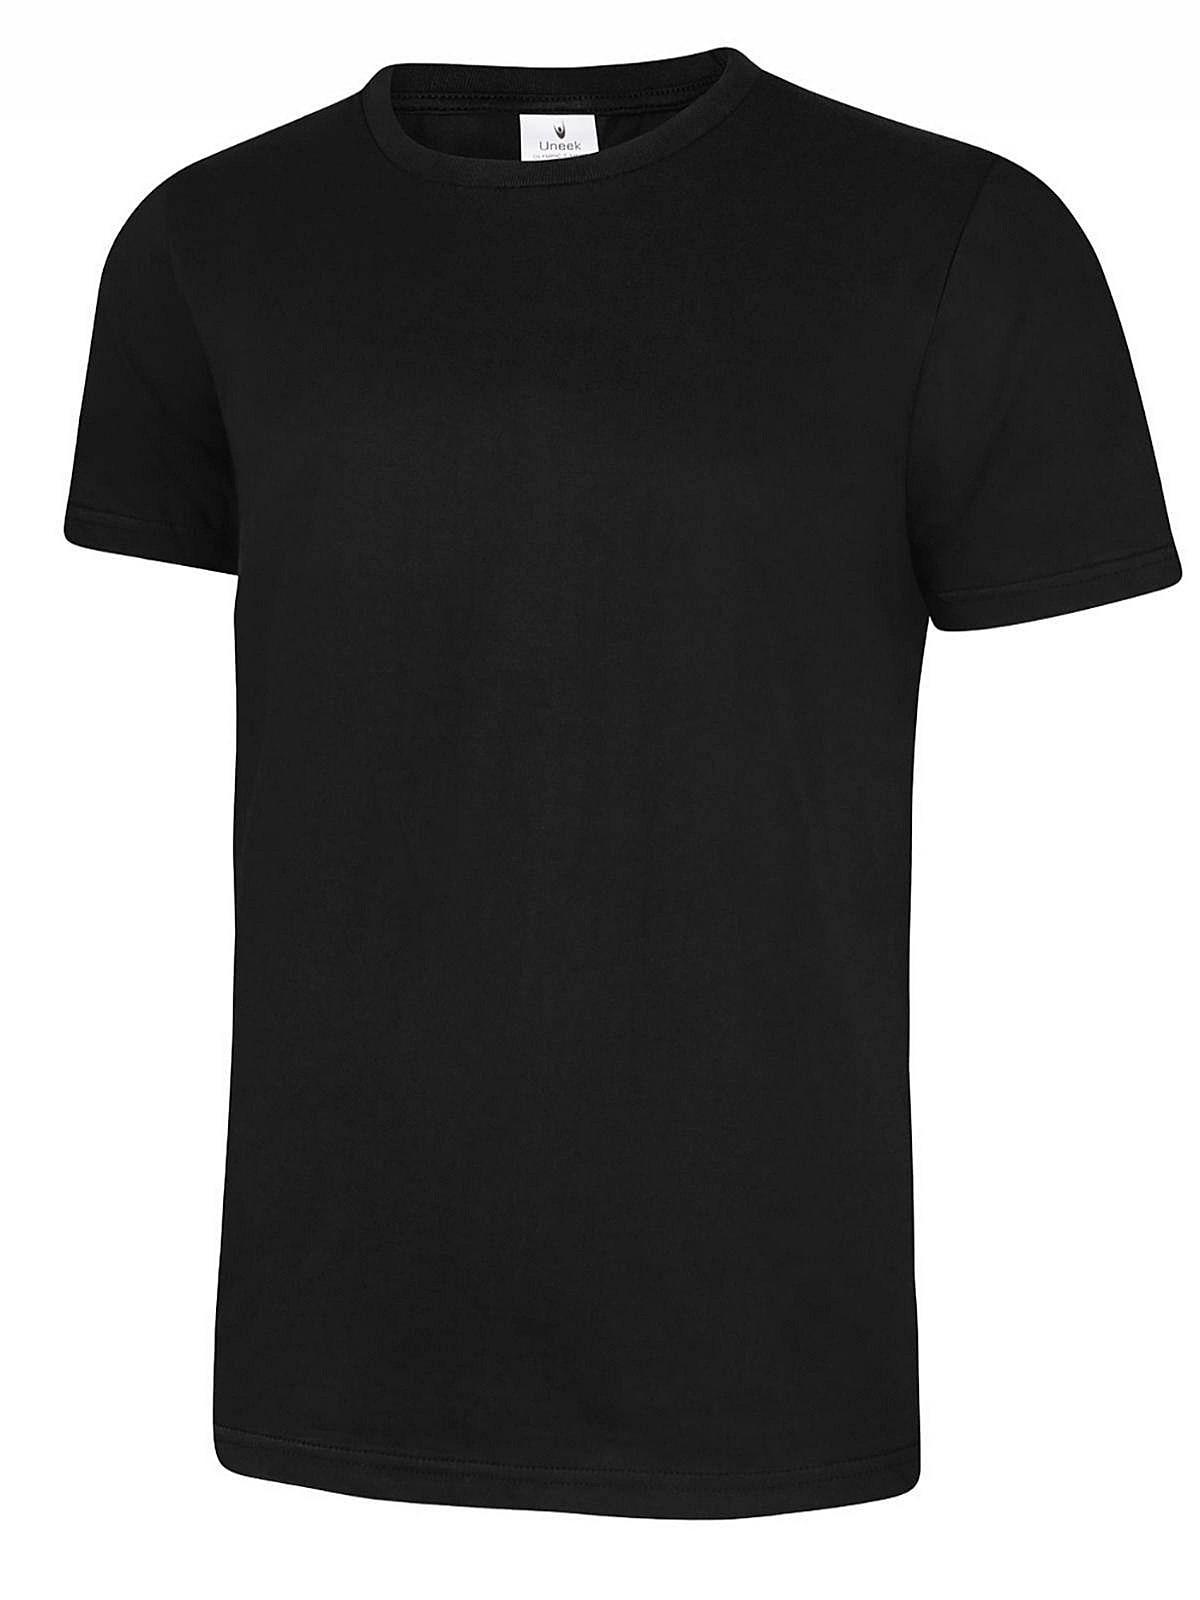 Uneek 150GSM Olympic T-Shirt in Black (Product Code: UC320)